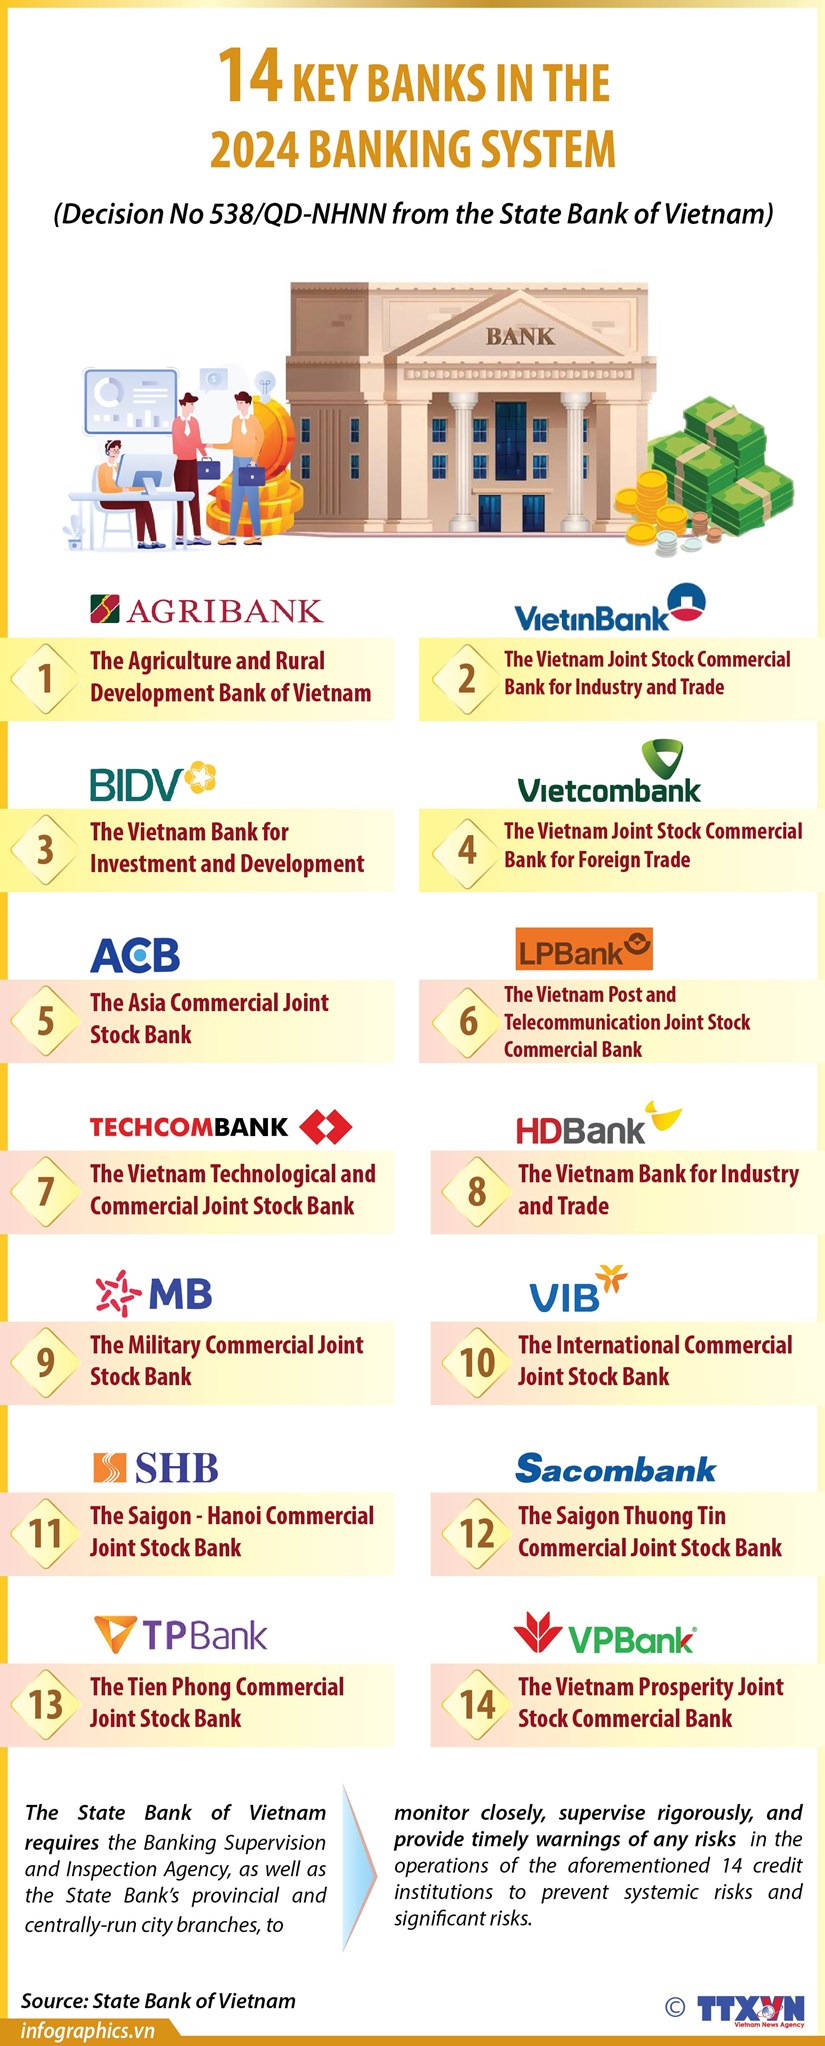 14 key banks in the 2024 banking system hinh anh 1